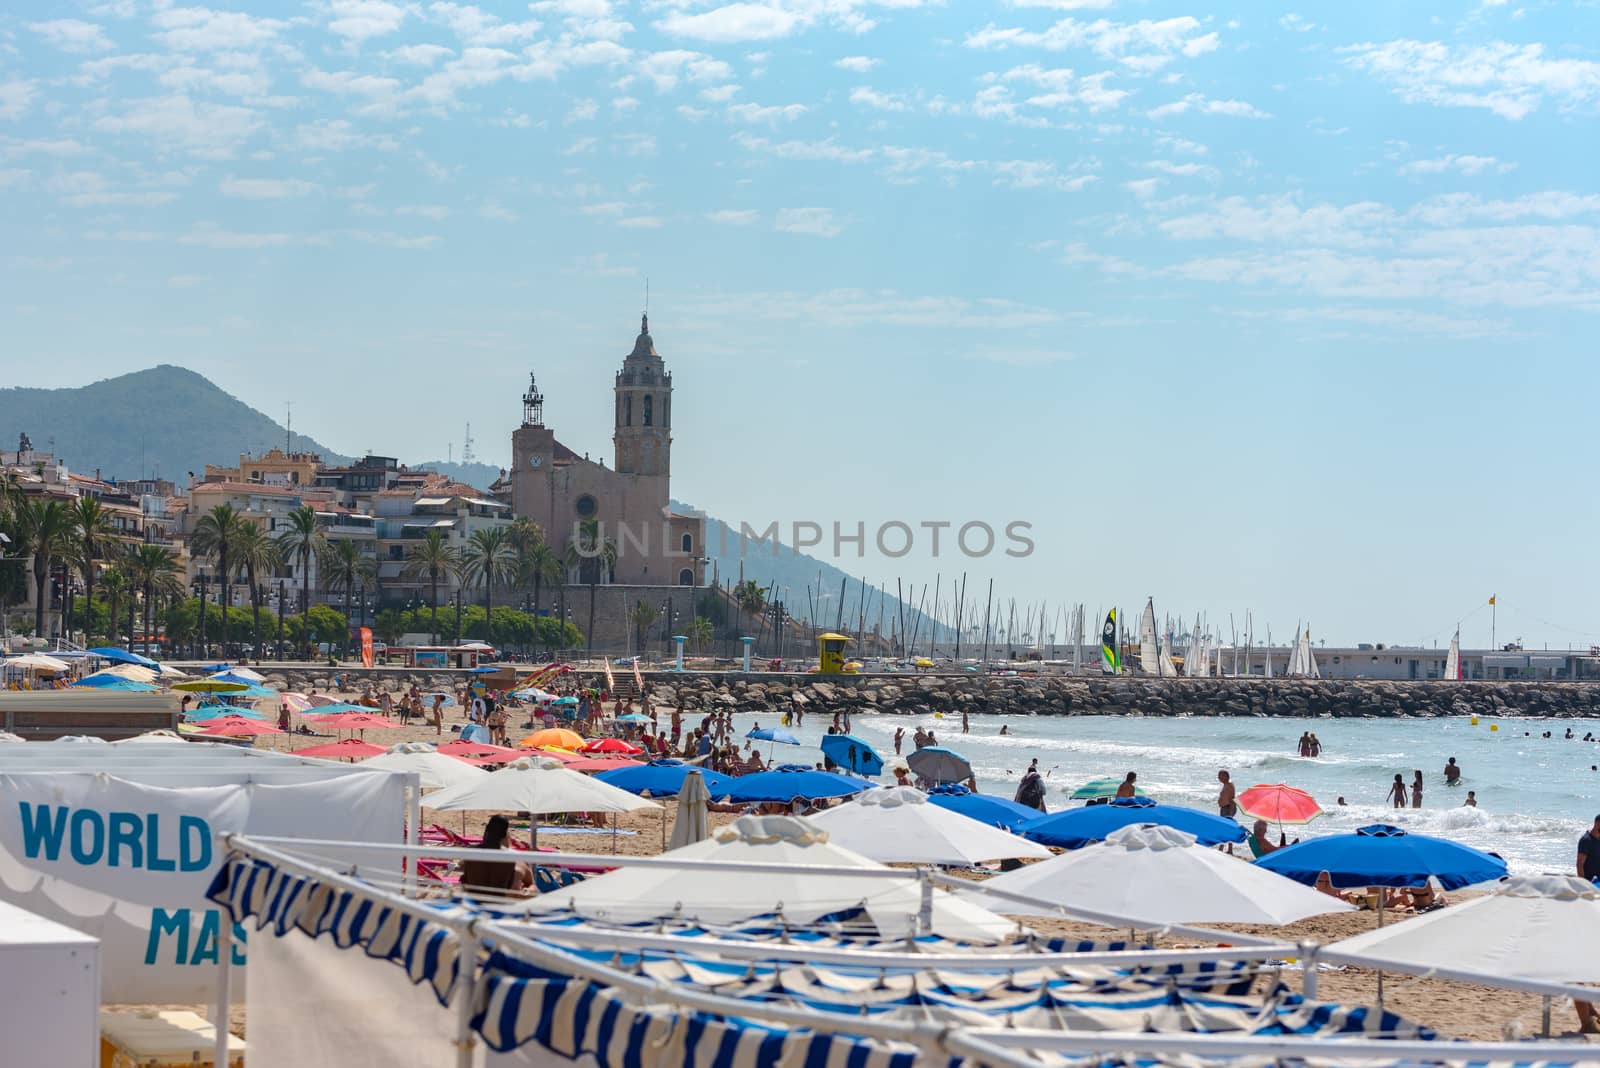 People on the Paseo Maritimo in the city of Sitges in the summer by martinscphoto